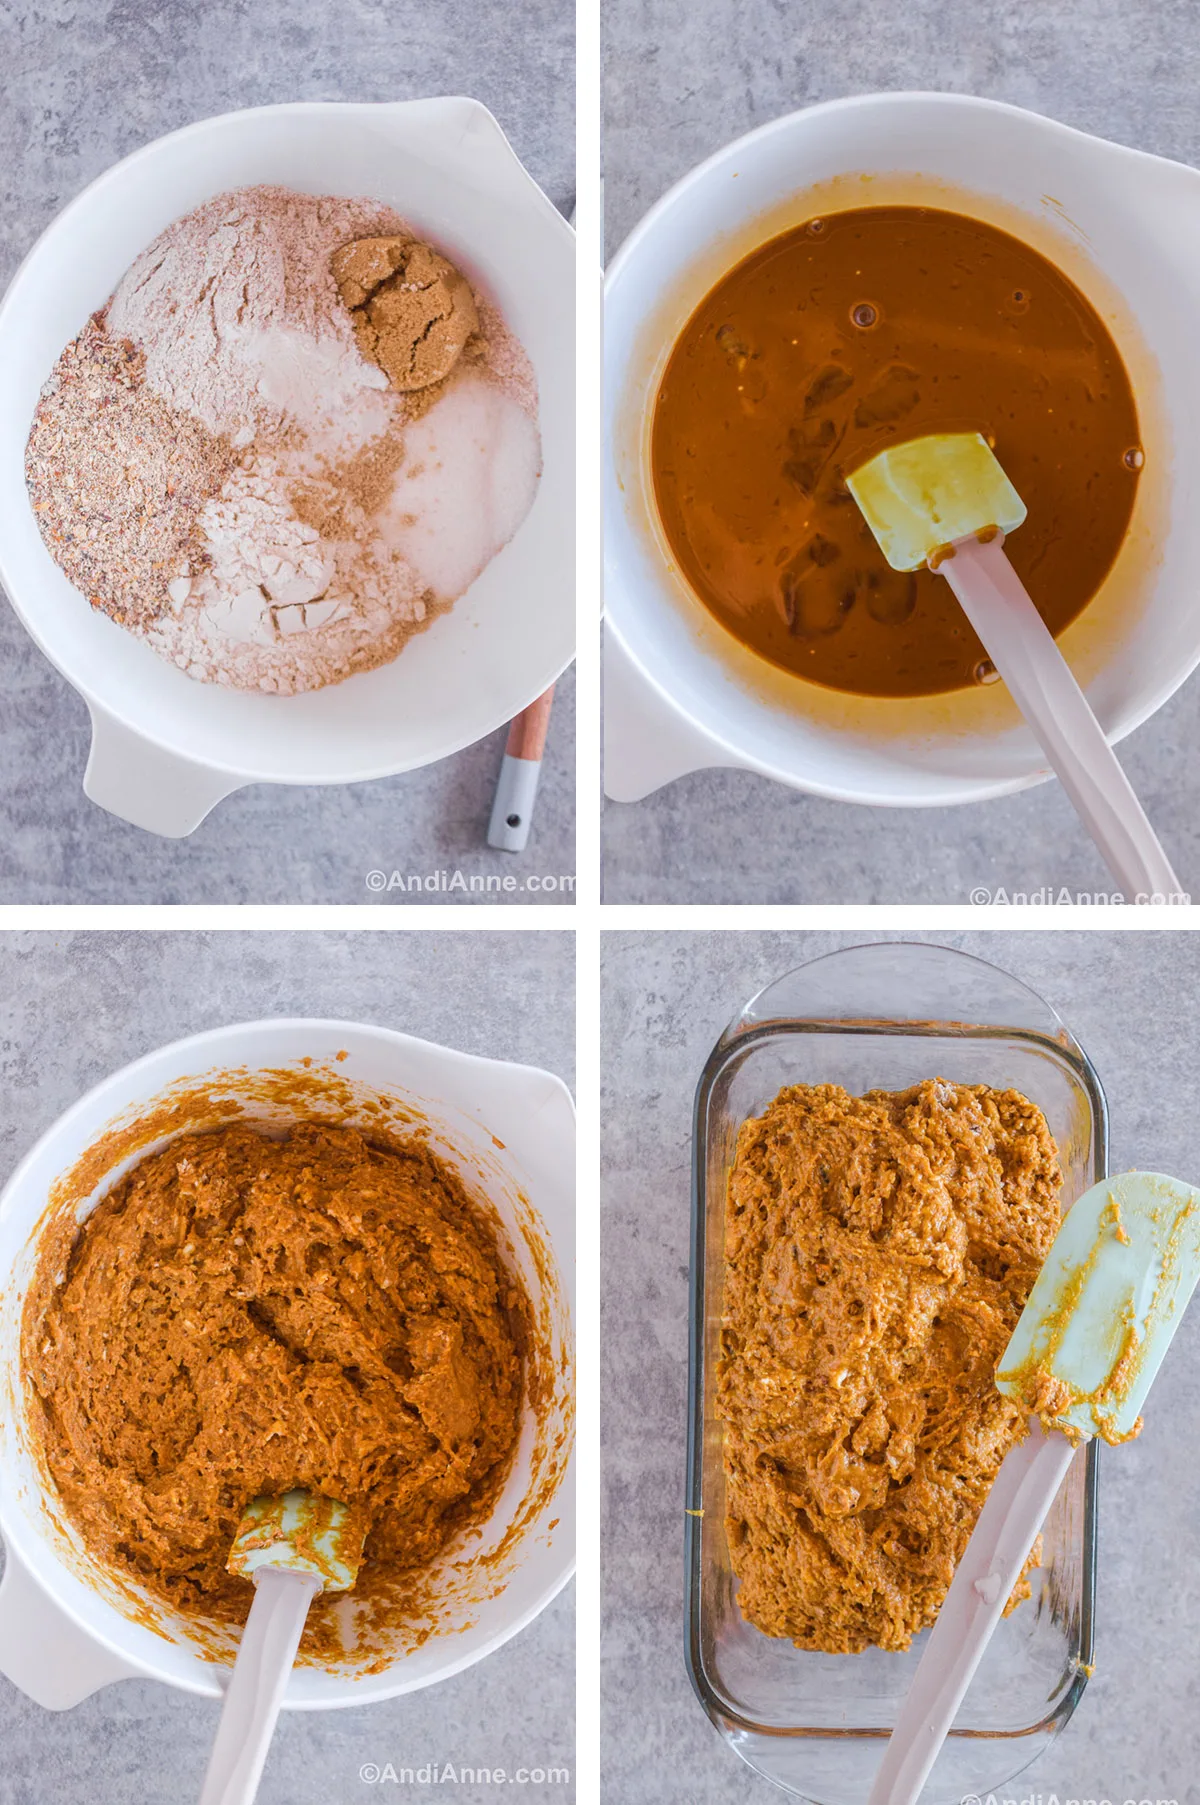 Four images showing steps to make the recipe. First is dry flour ingredients, sugars and baking powder. Second is dark brown wet ingredients in bowl with spatula. Third is brown wet batter in a white bowl with spatula. Fourth is batter dumped into glass loaf pan with a spatula on top.